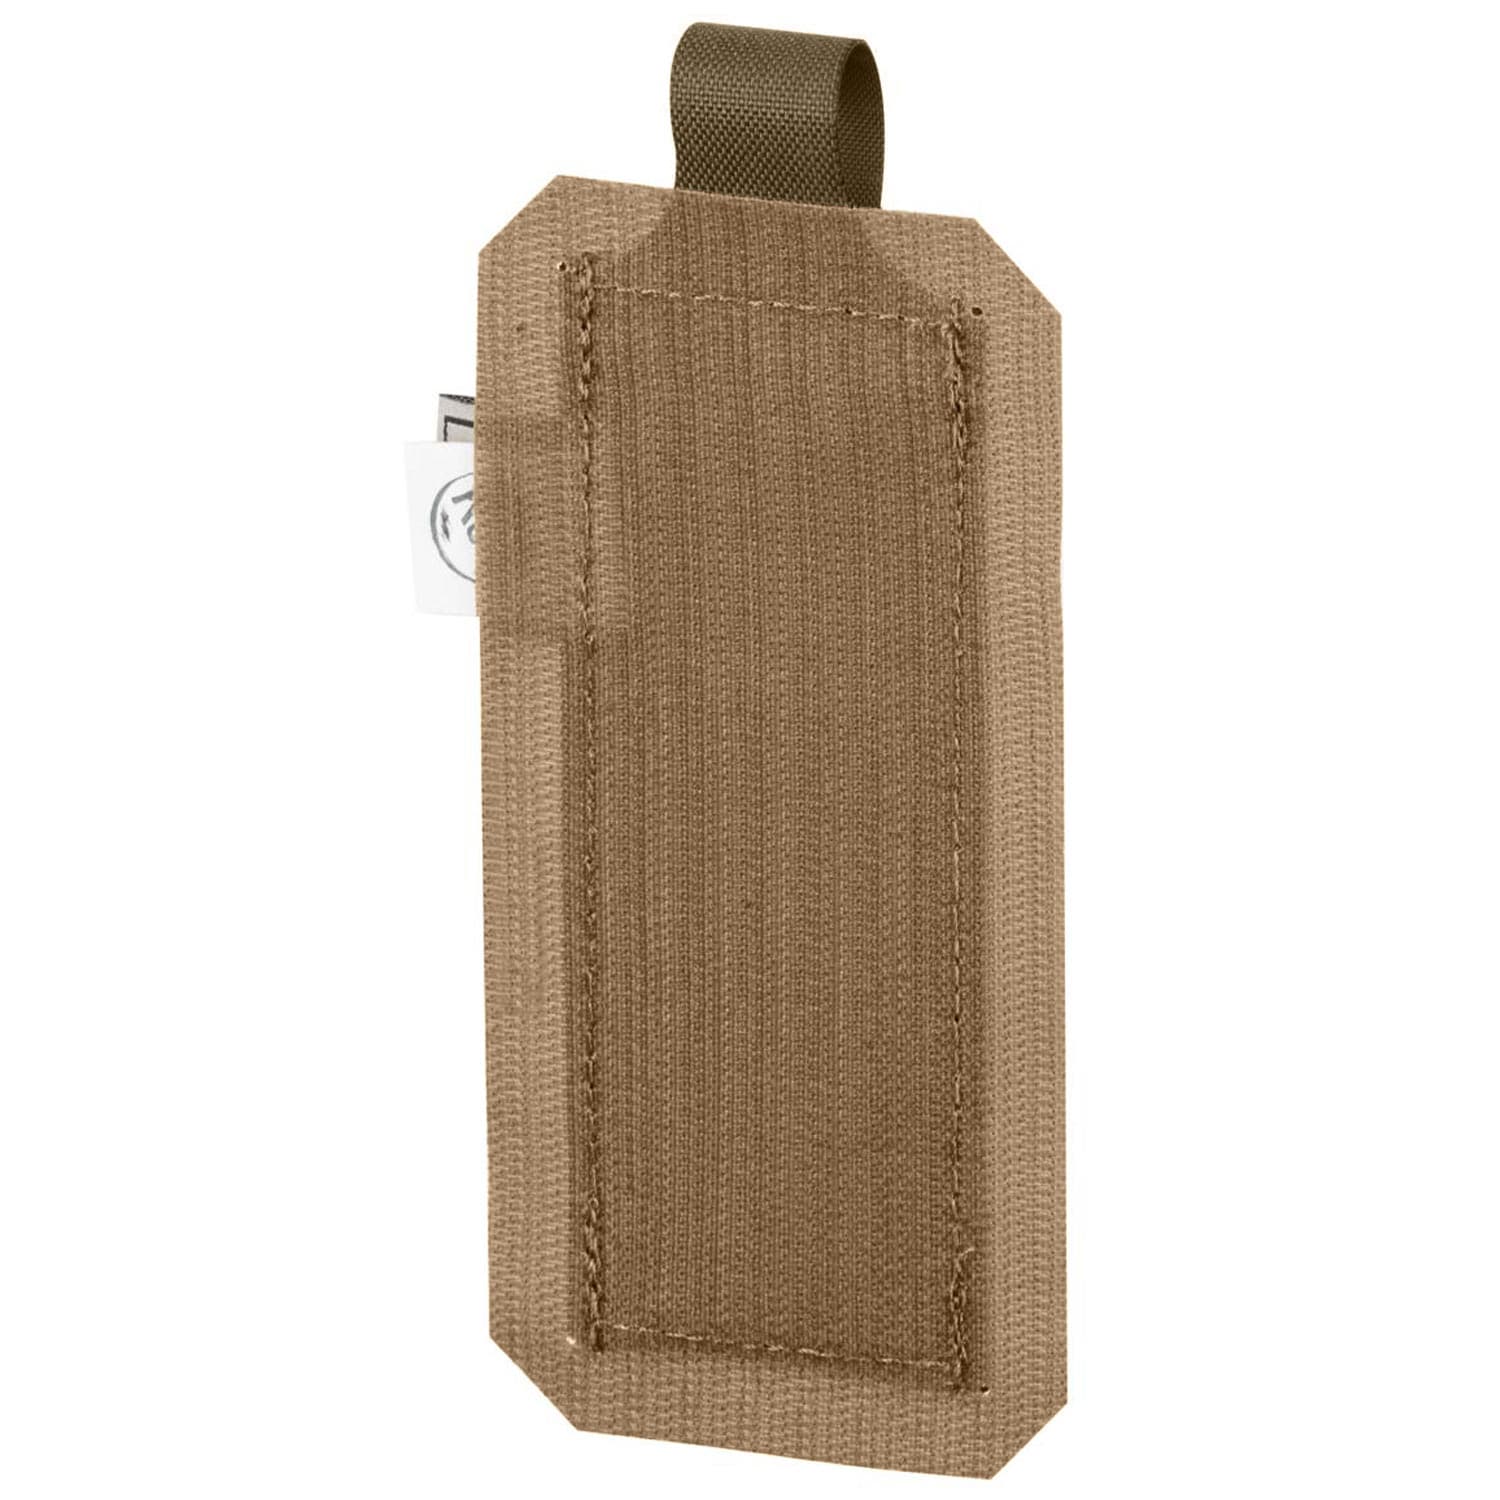 Ładownica Direct Action na nożyczki Shears Pouch - Coyote Brown